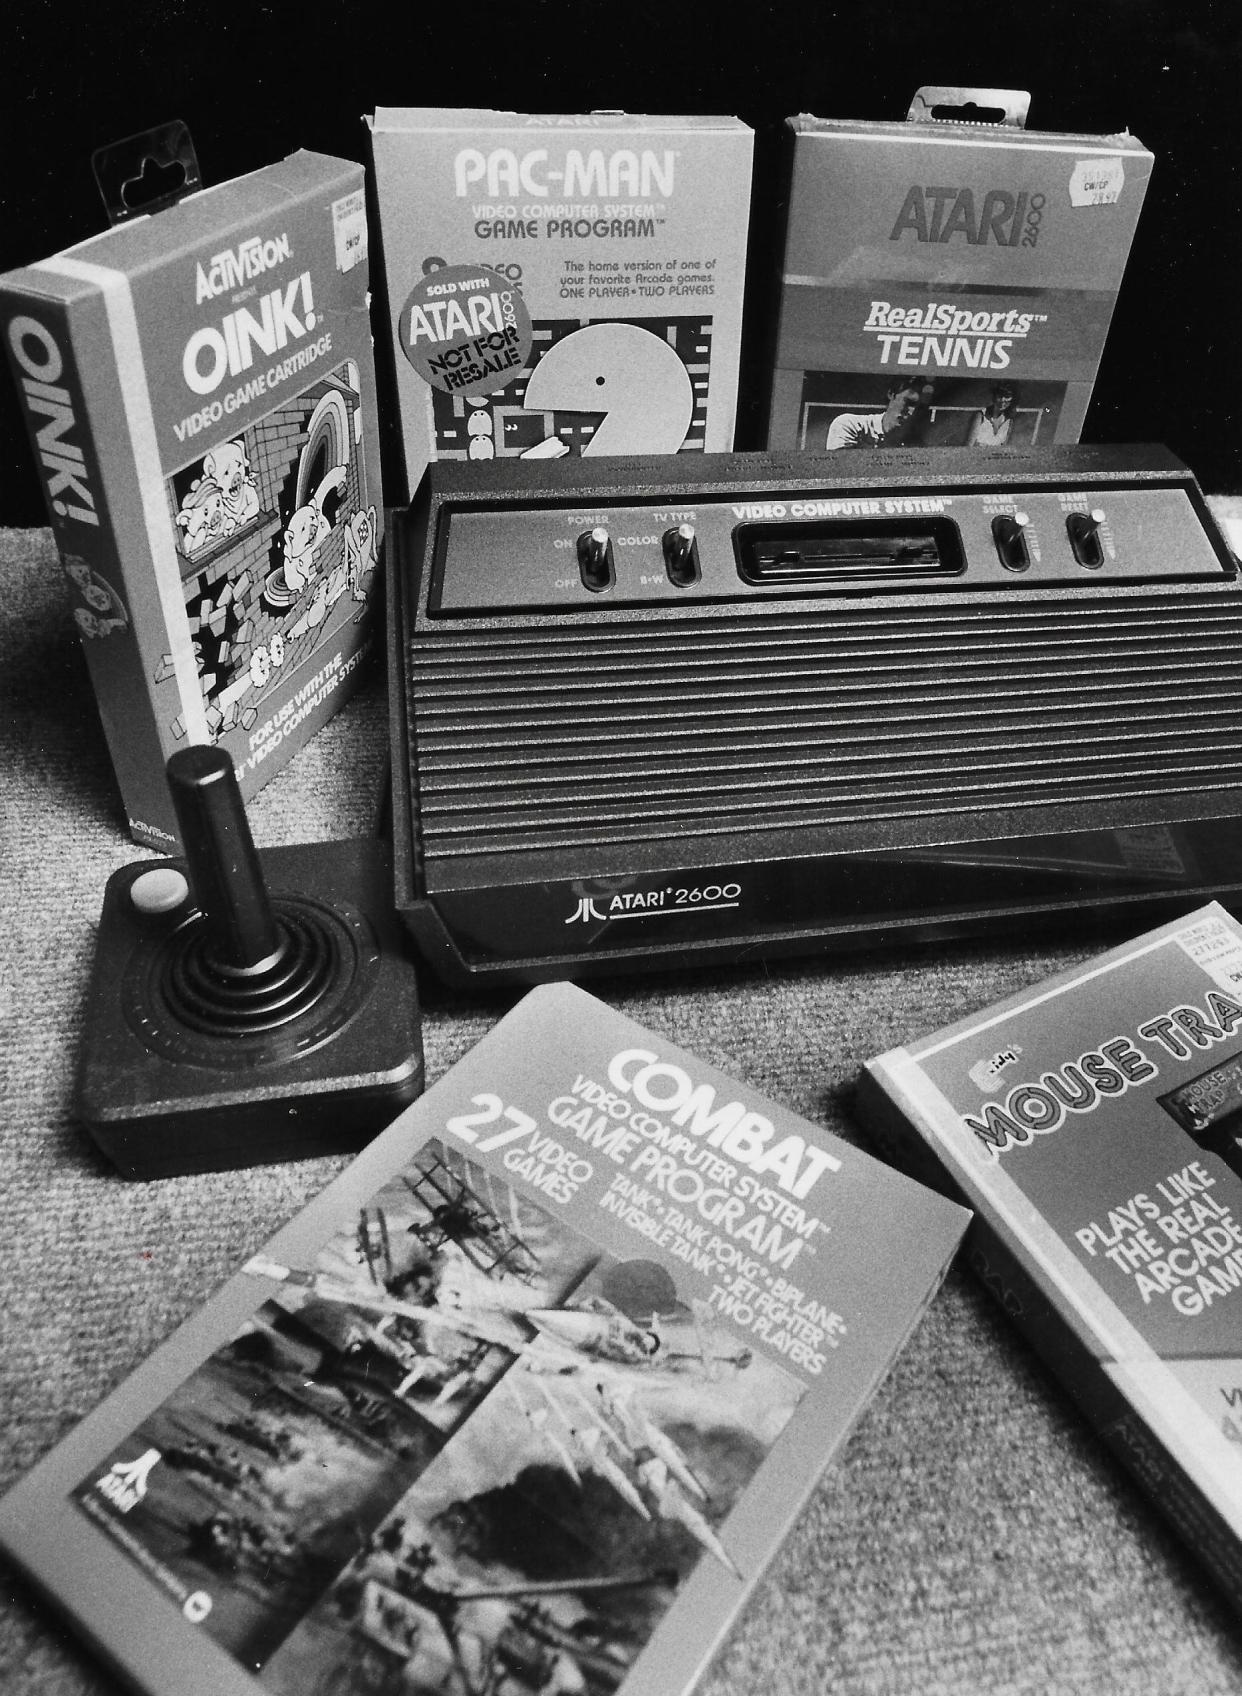 An Atari 2600 console and game cartridges are displayed for Christmas 1983.